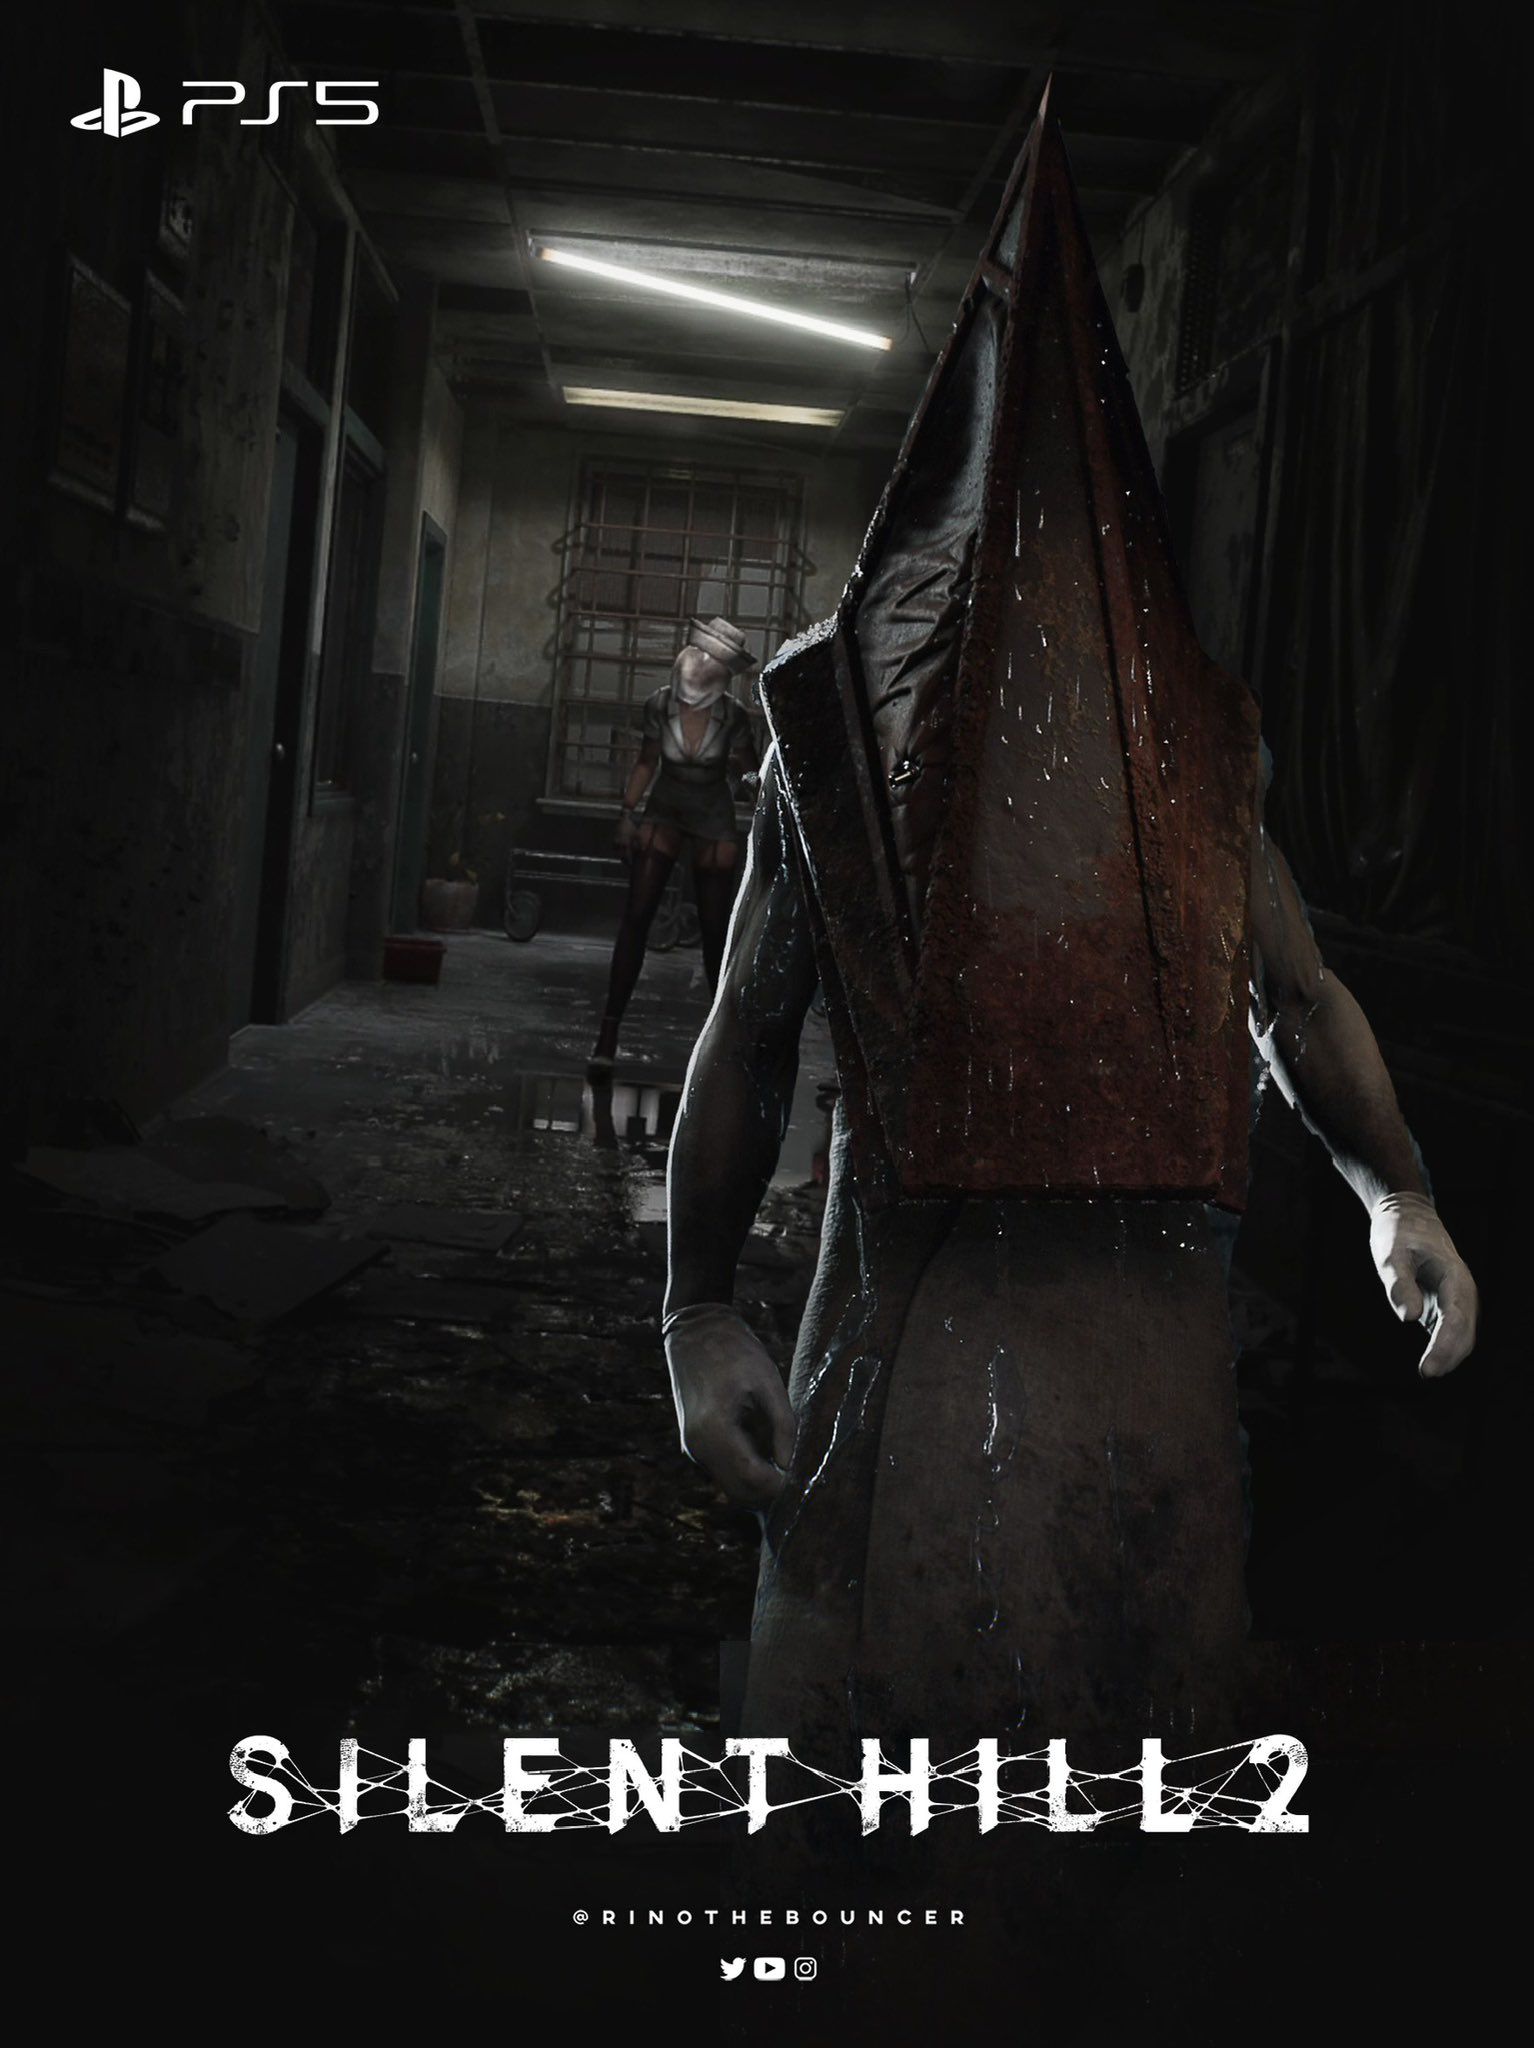 Rino on X: UPDATE: Silent Hill 2 dev profile on Steam shows 12  achievements for Silent Hill 2🚀 Could this mean the game is coming sooner  than we think?😎 Source:  #PlayStation #